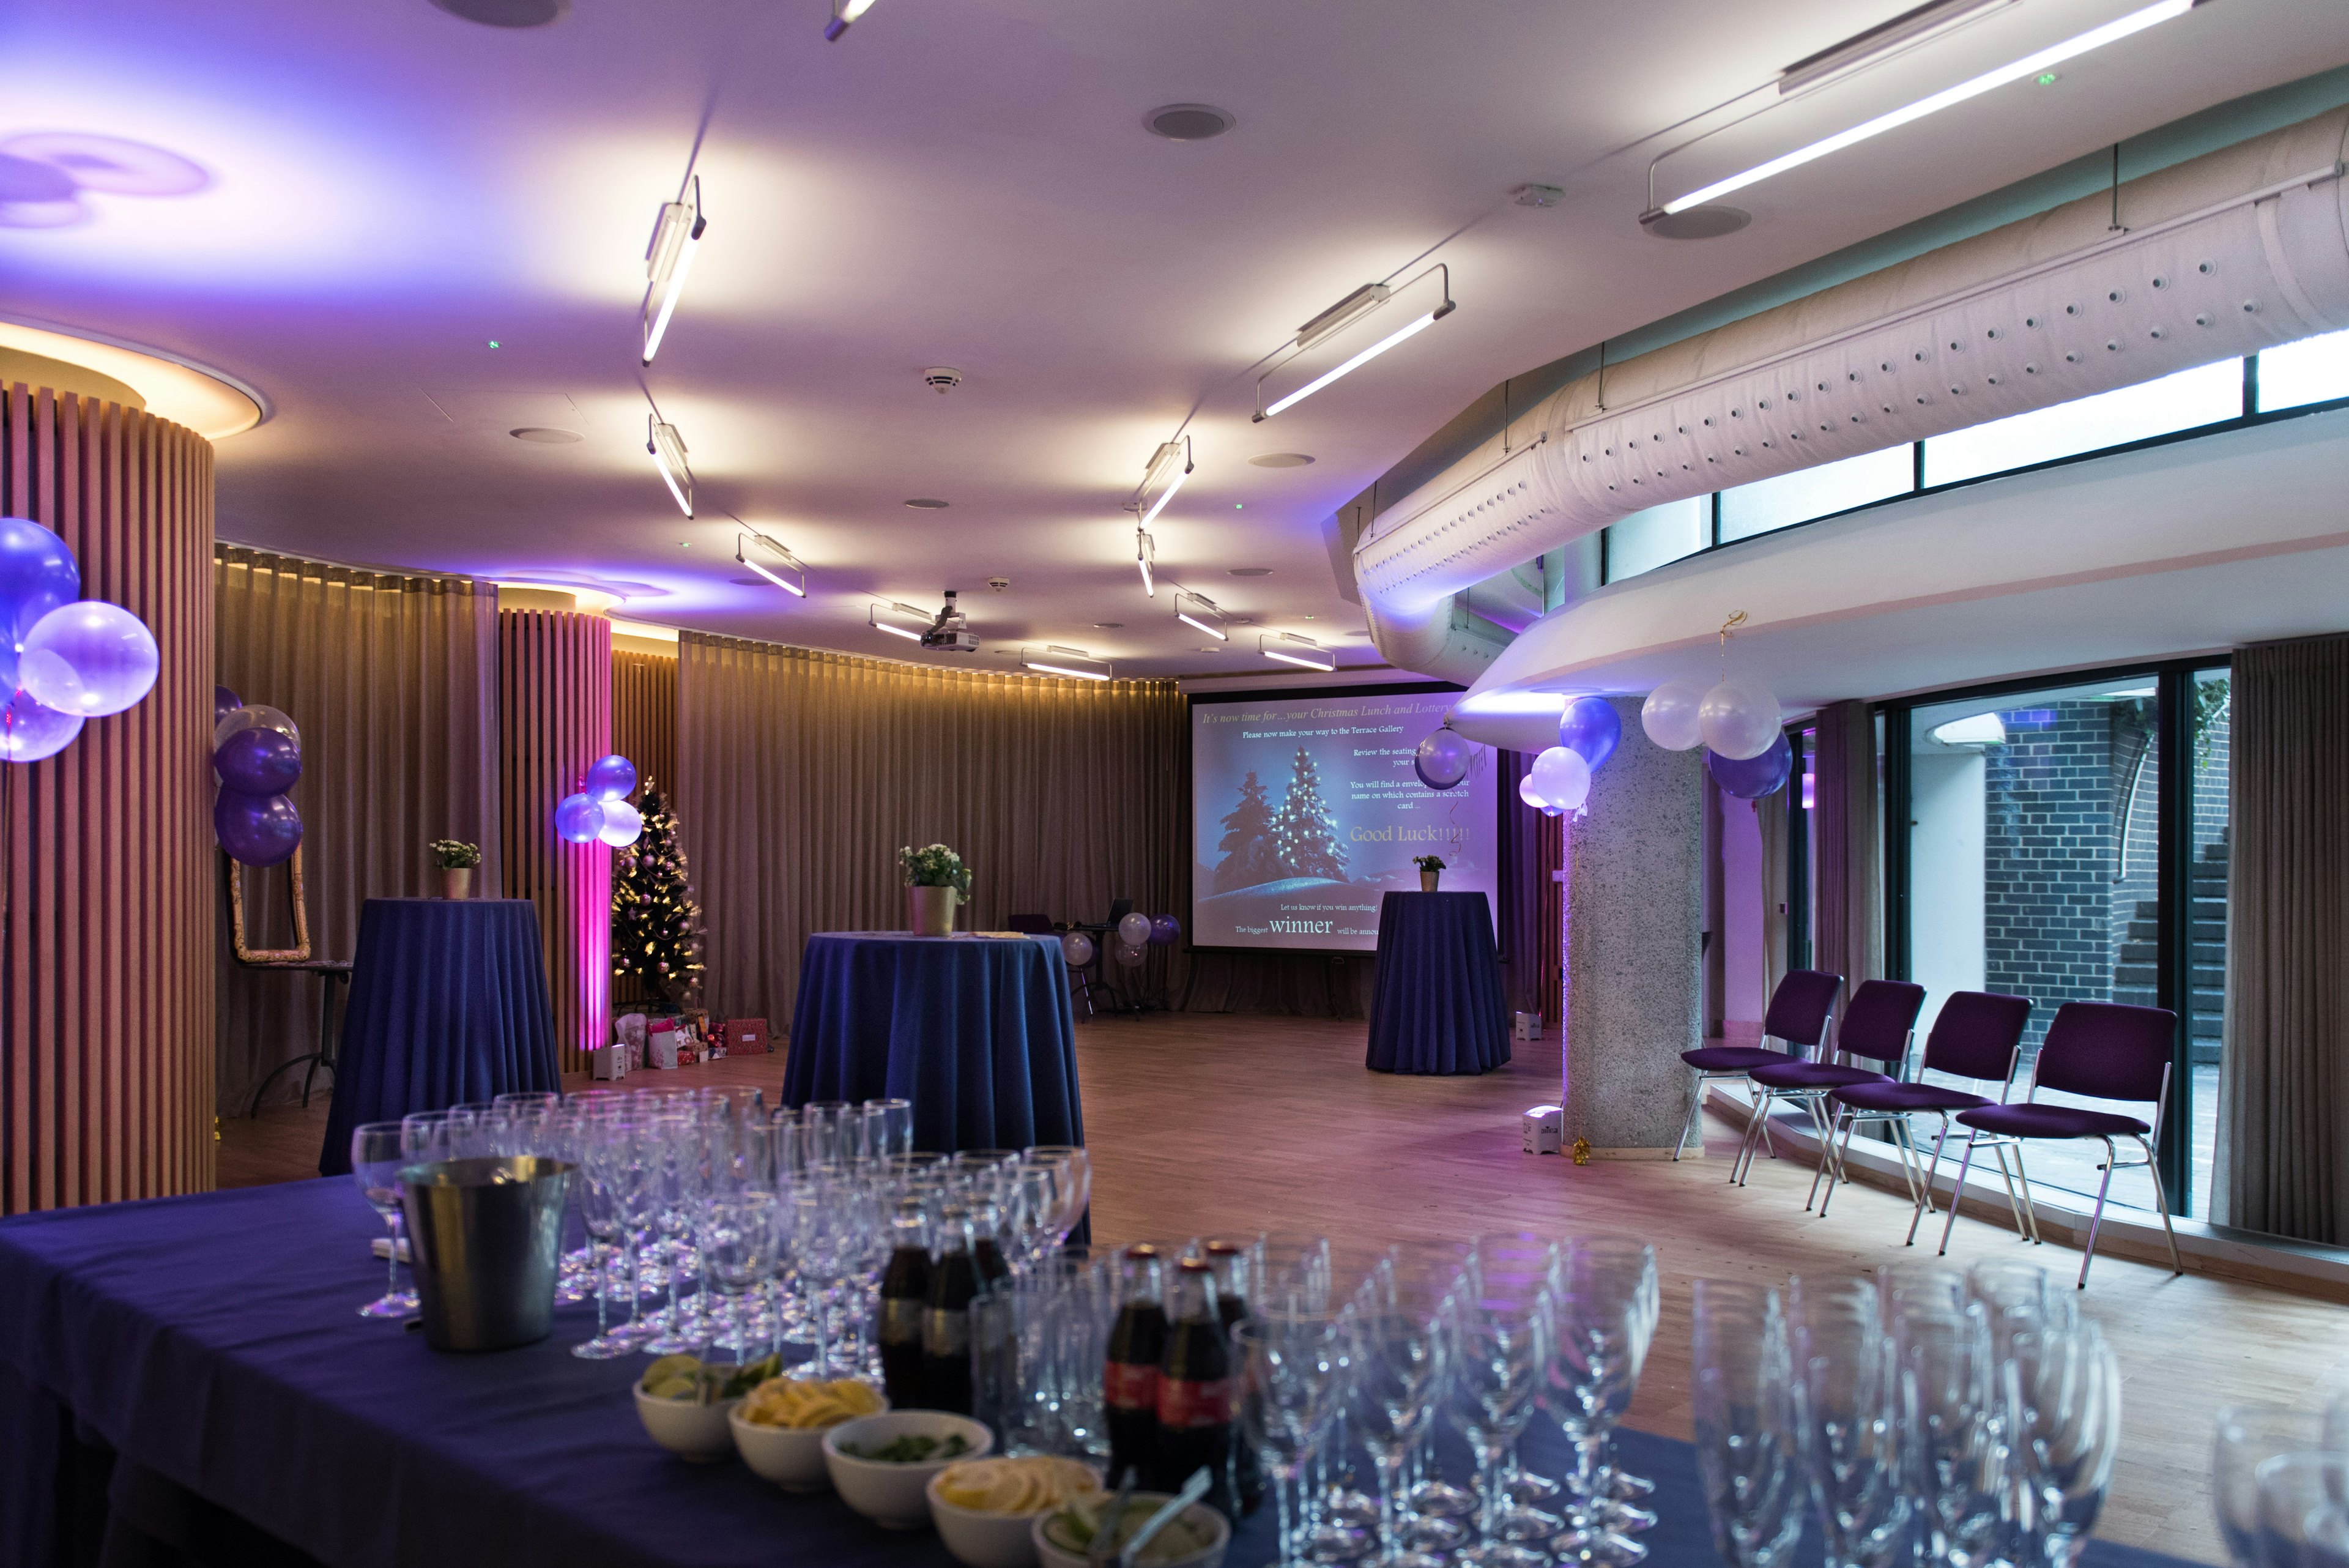 Cheap Conference Venues - Museum of London - Business in Garden Room - Banner